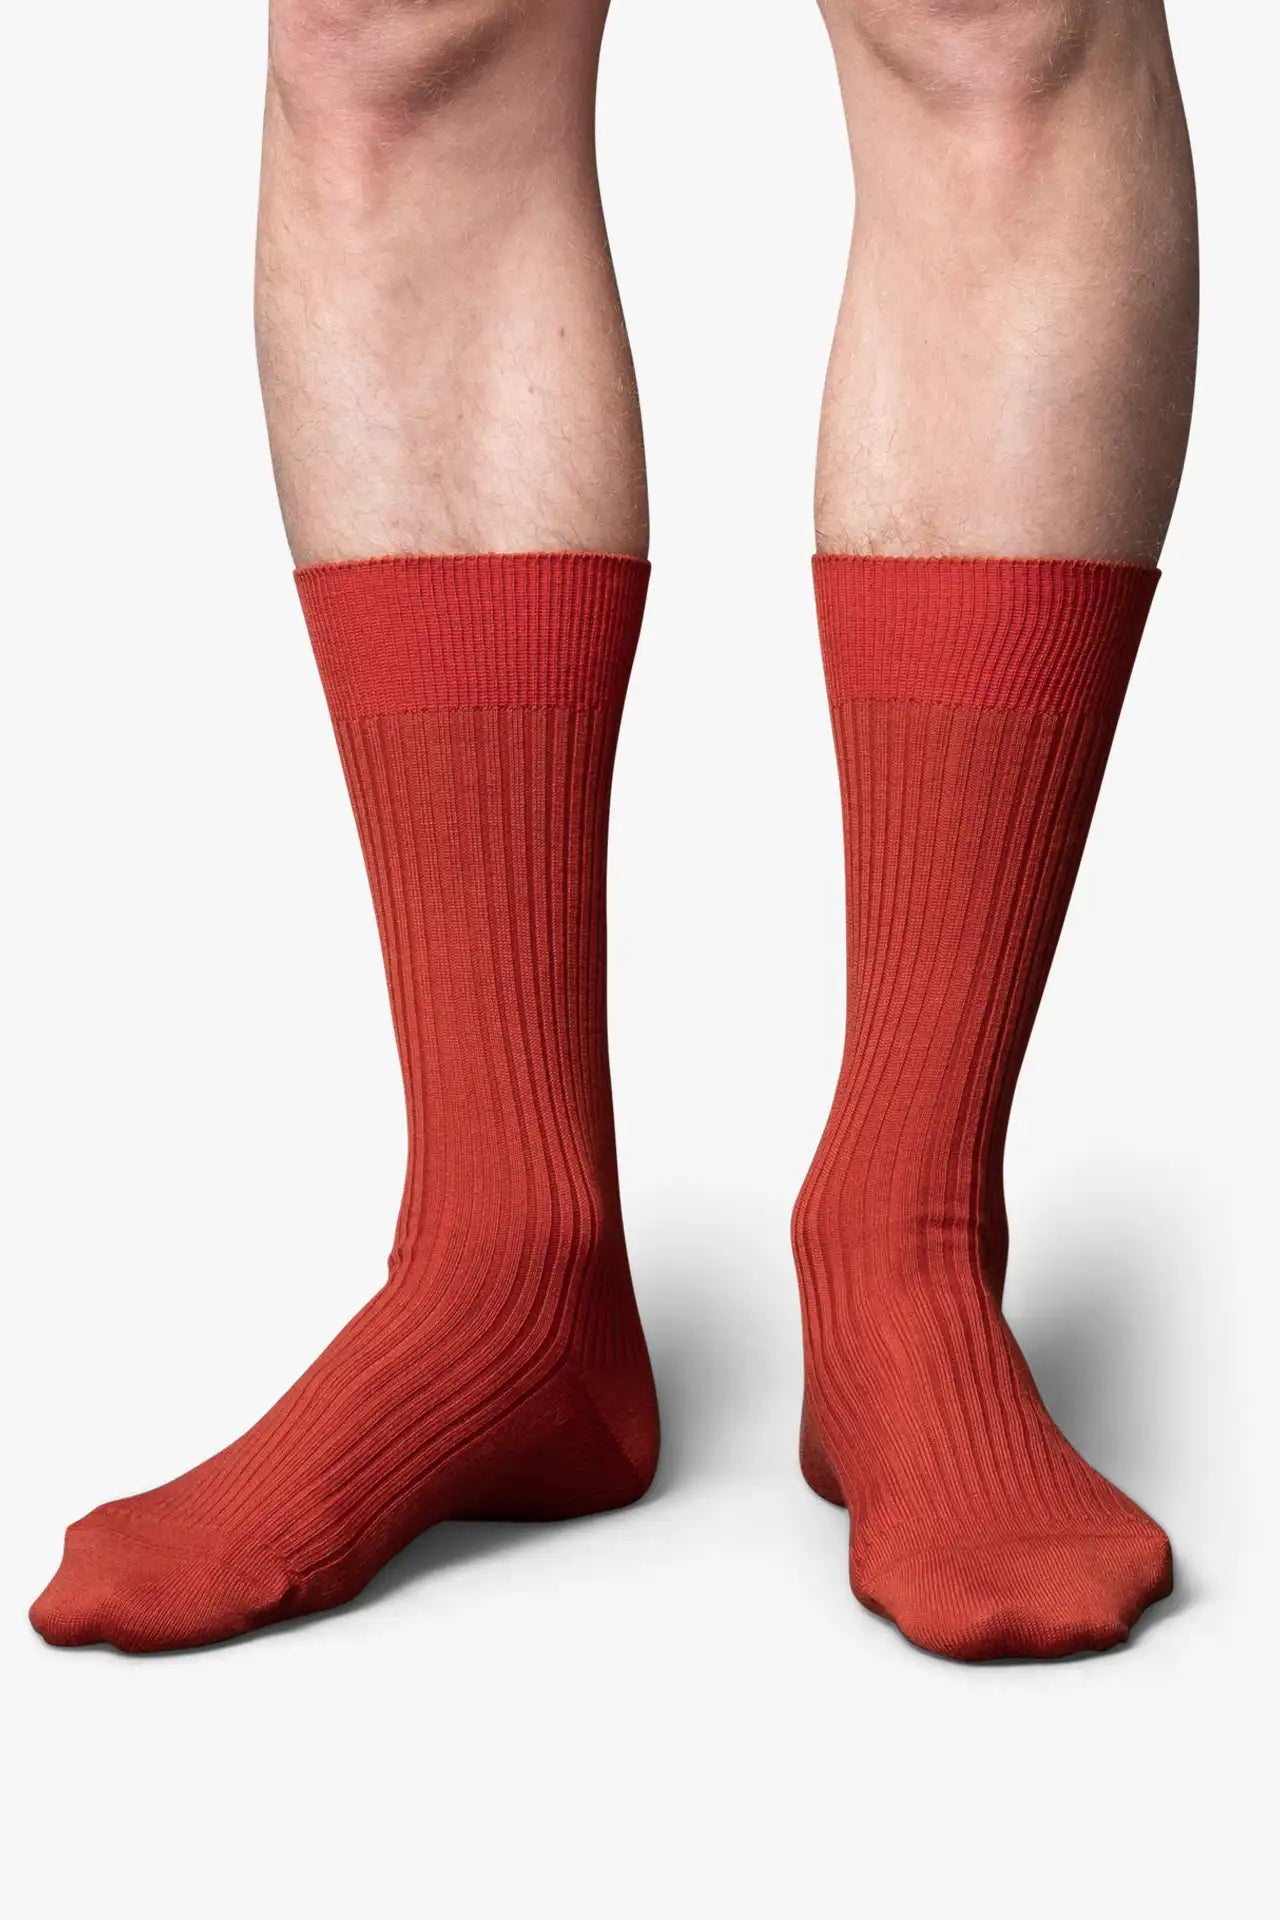 Orange copper socks in merino wool. Swedish design by once a day and produced by glenn clyde. Can we washed in warm water without shrinking.